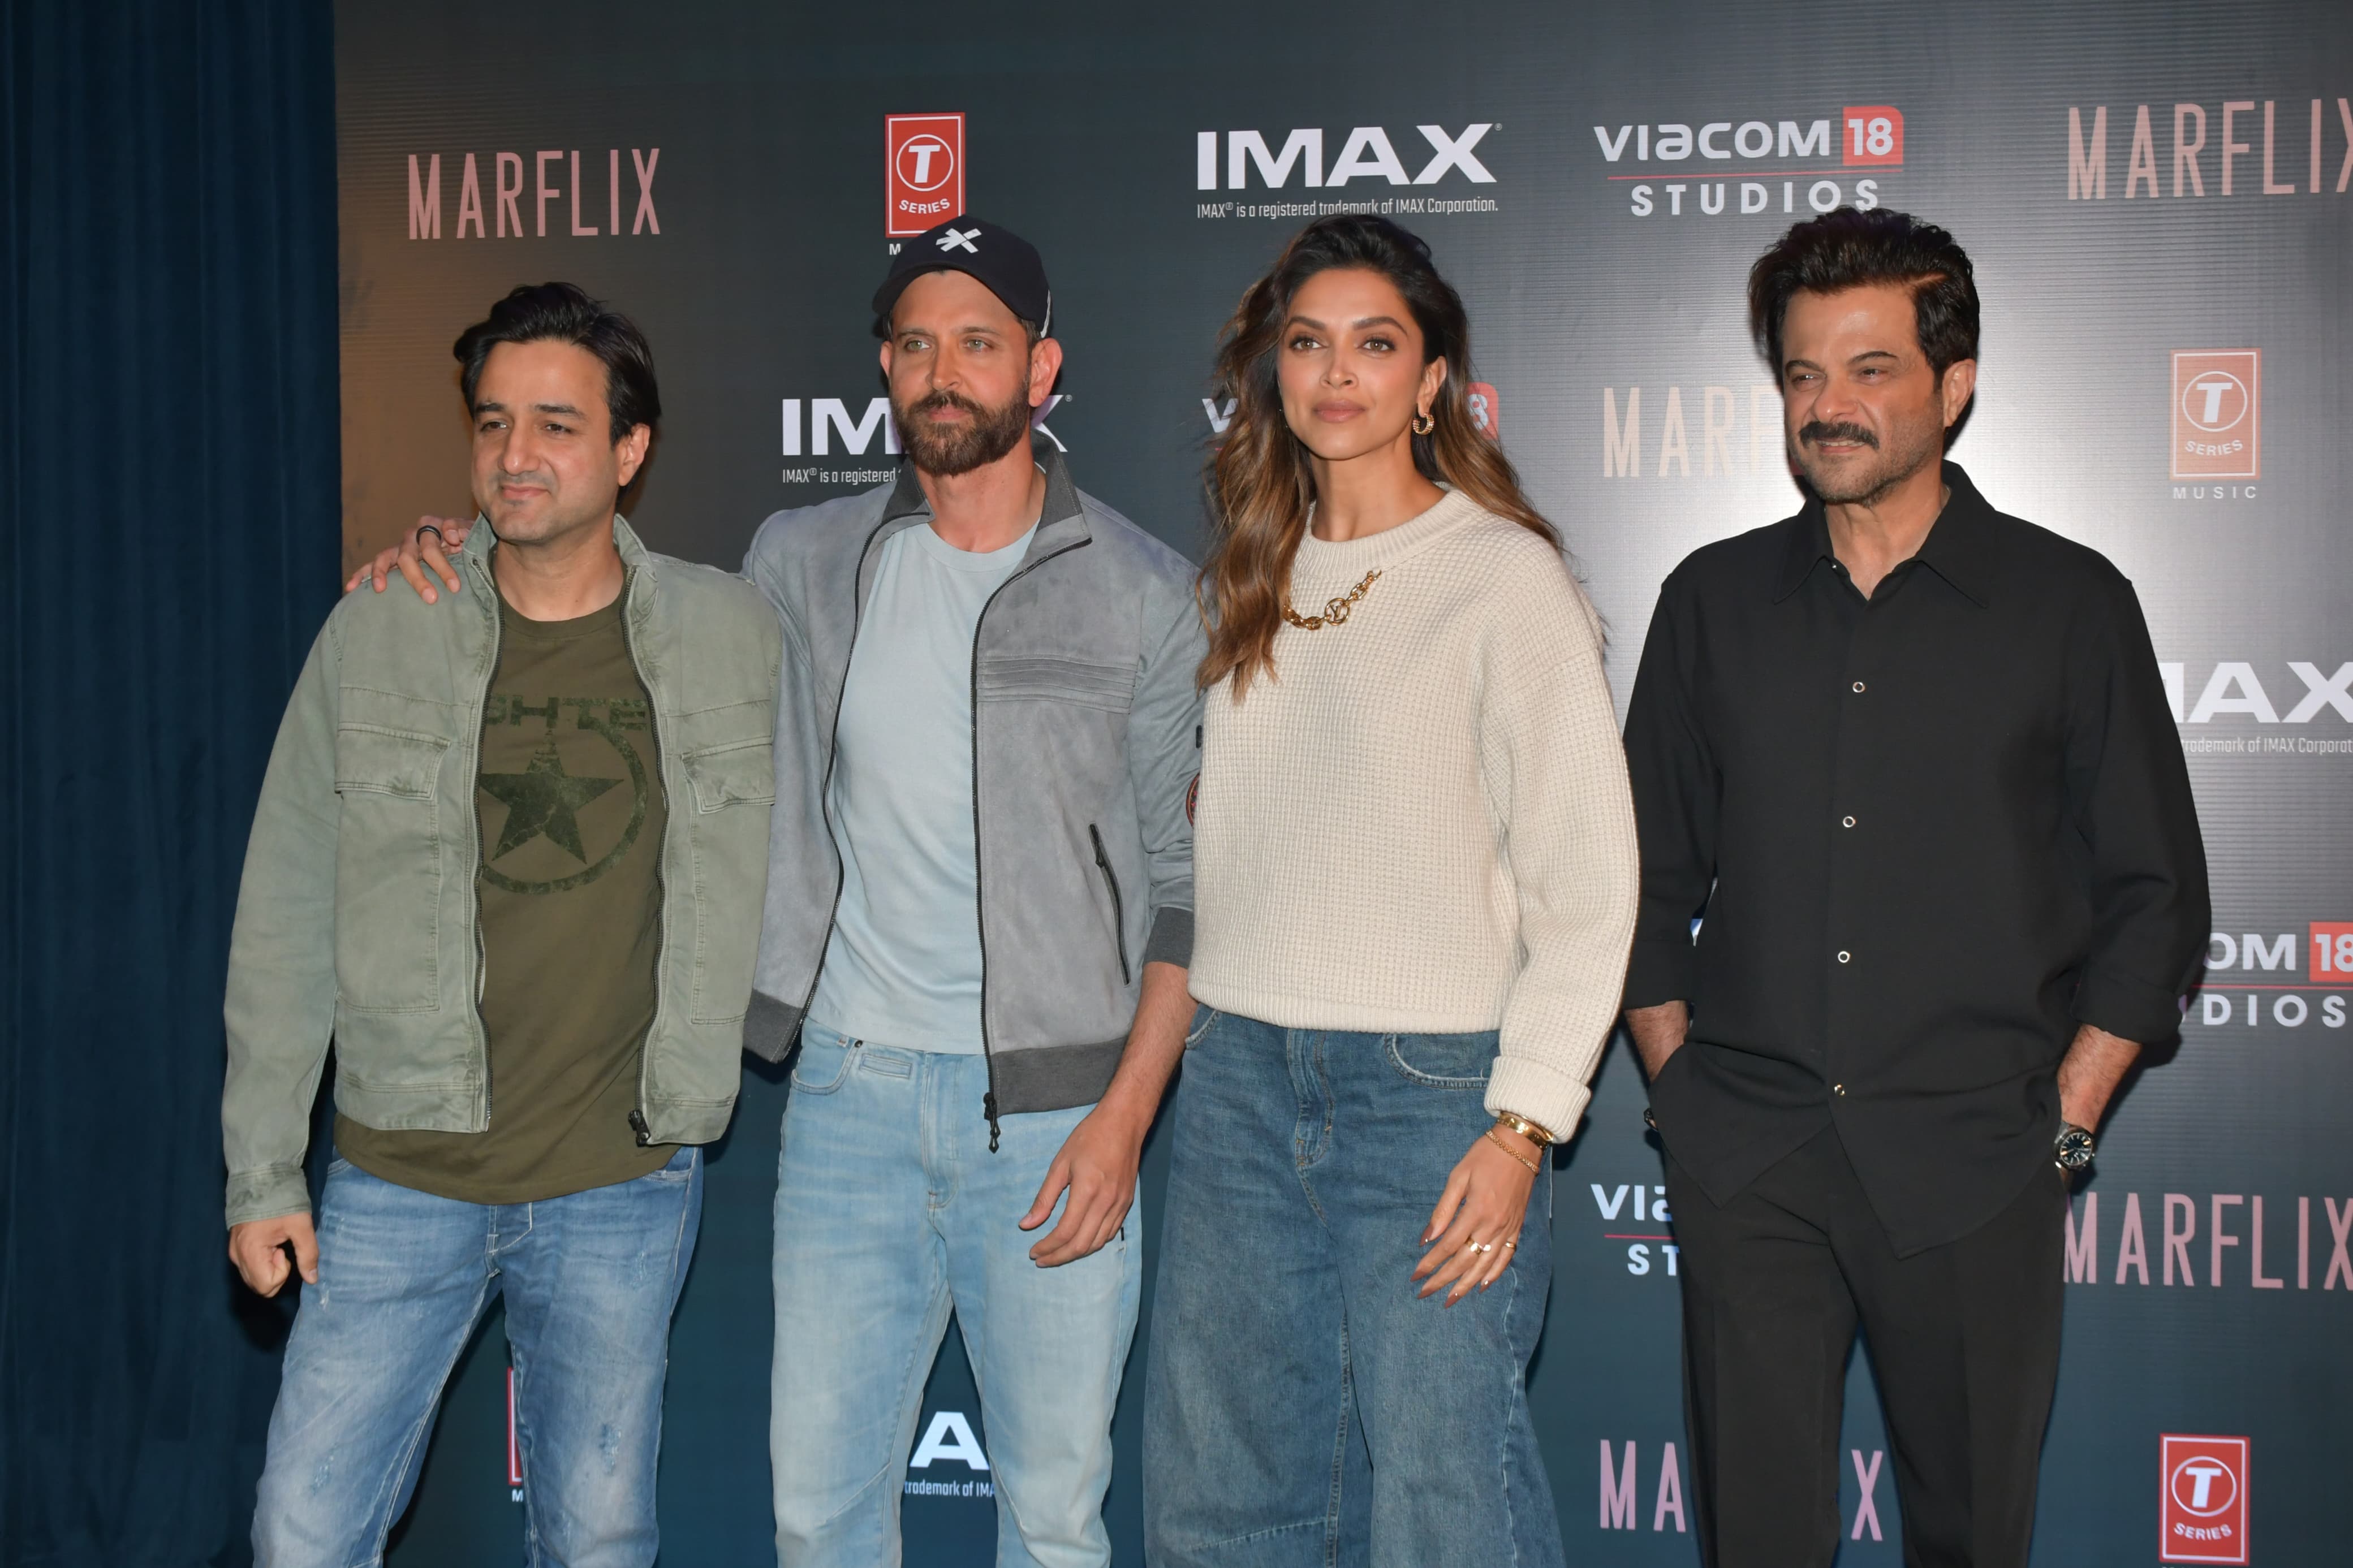 Hrithik Roshan, Deepika Padukone, Anil Kapoor, and Siddharth Anand marked their attendance to promote their much anticipated movie